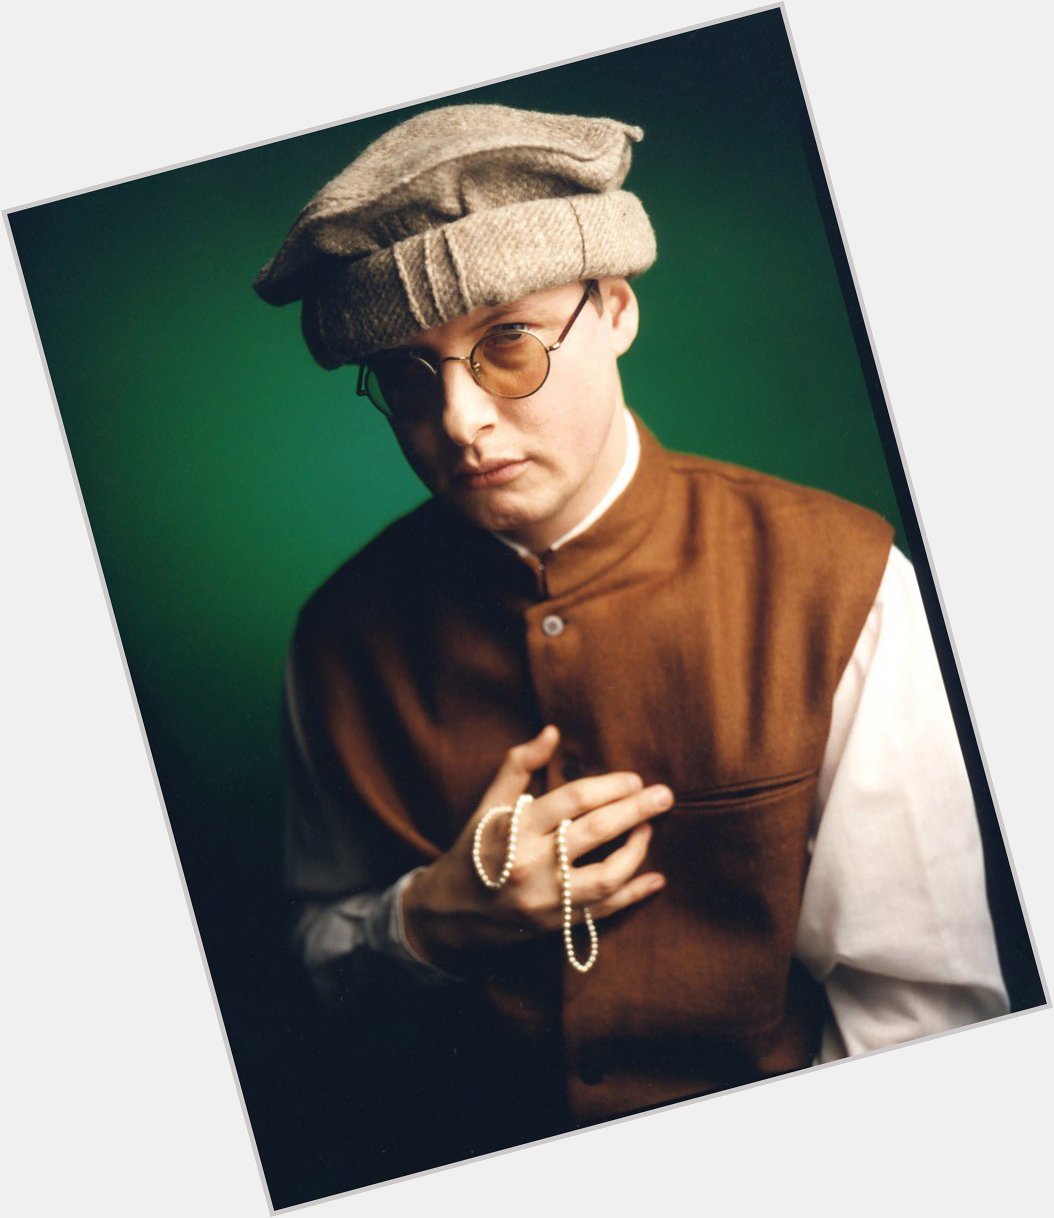 Wishing one of my favourite songwriters and musicians in the world, Andy Partridge of XTC, a very happy birthday! 